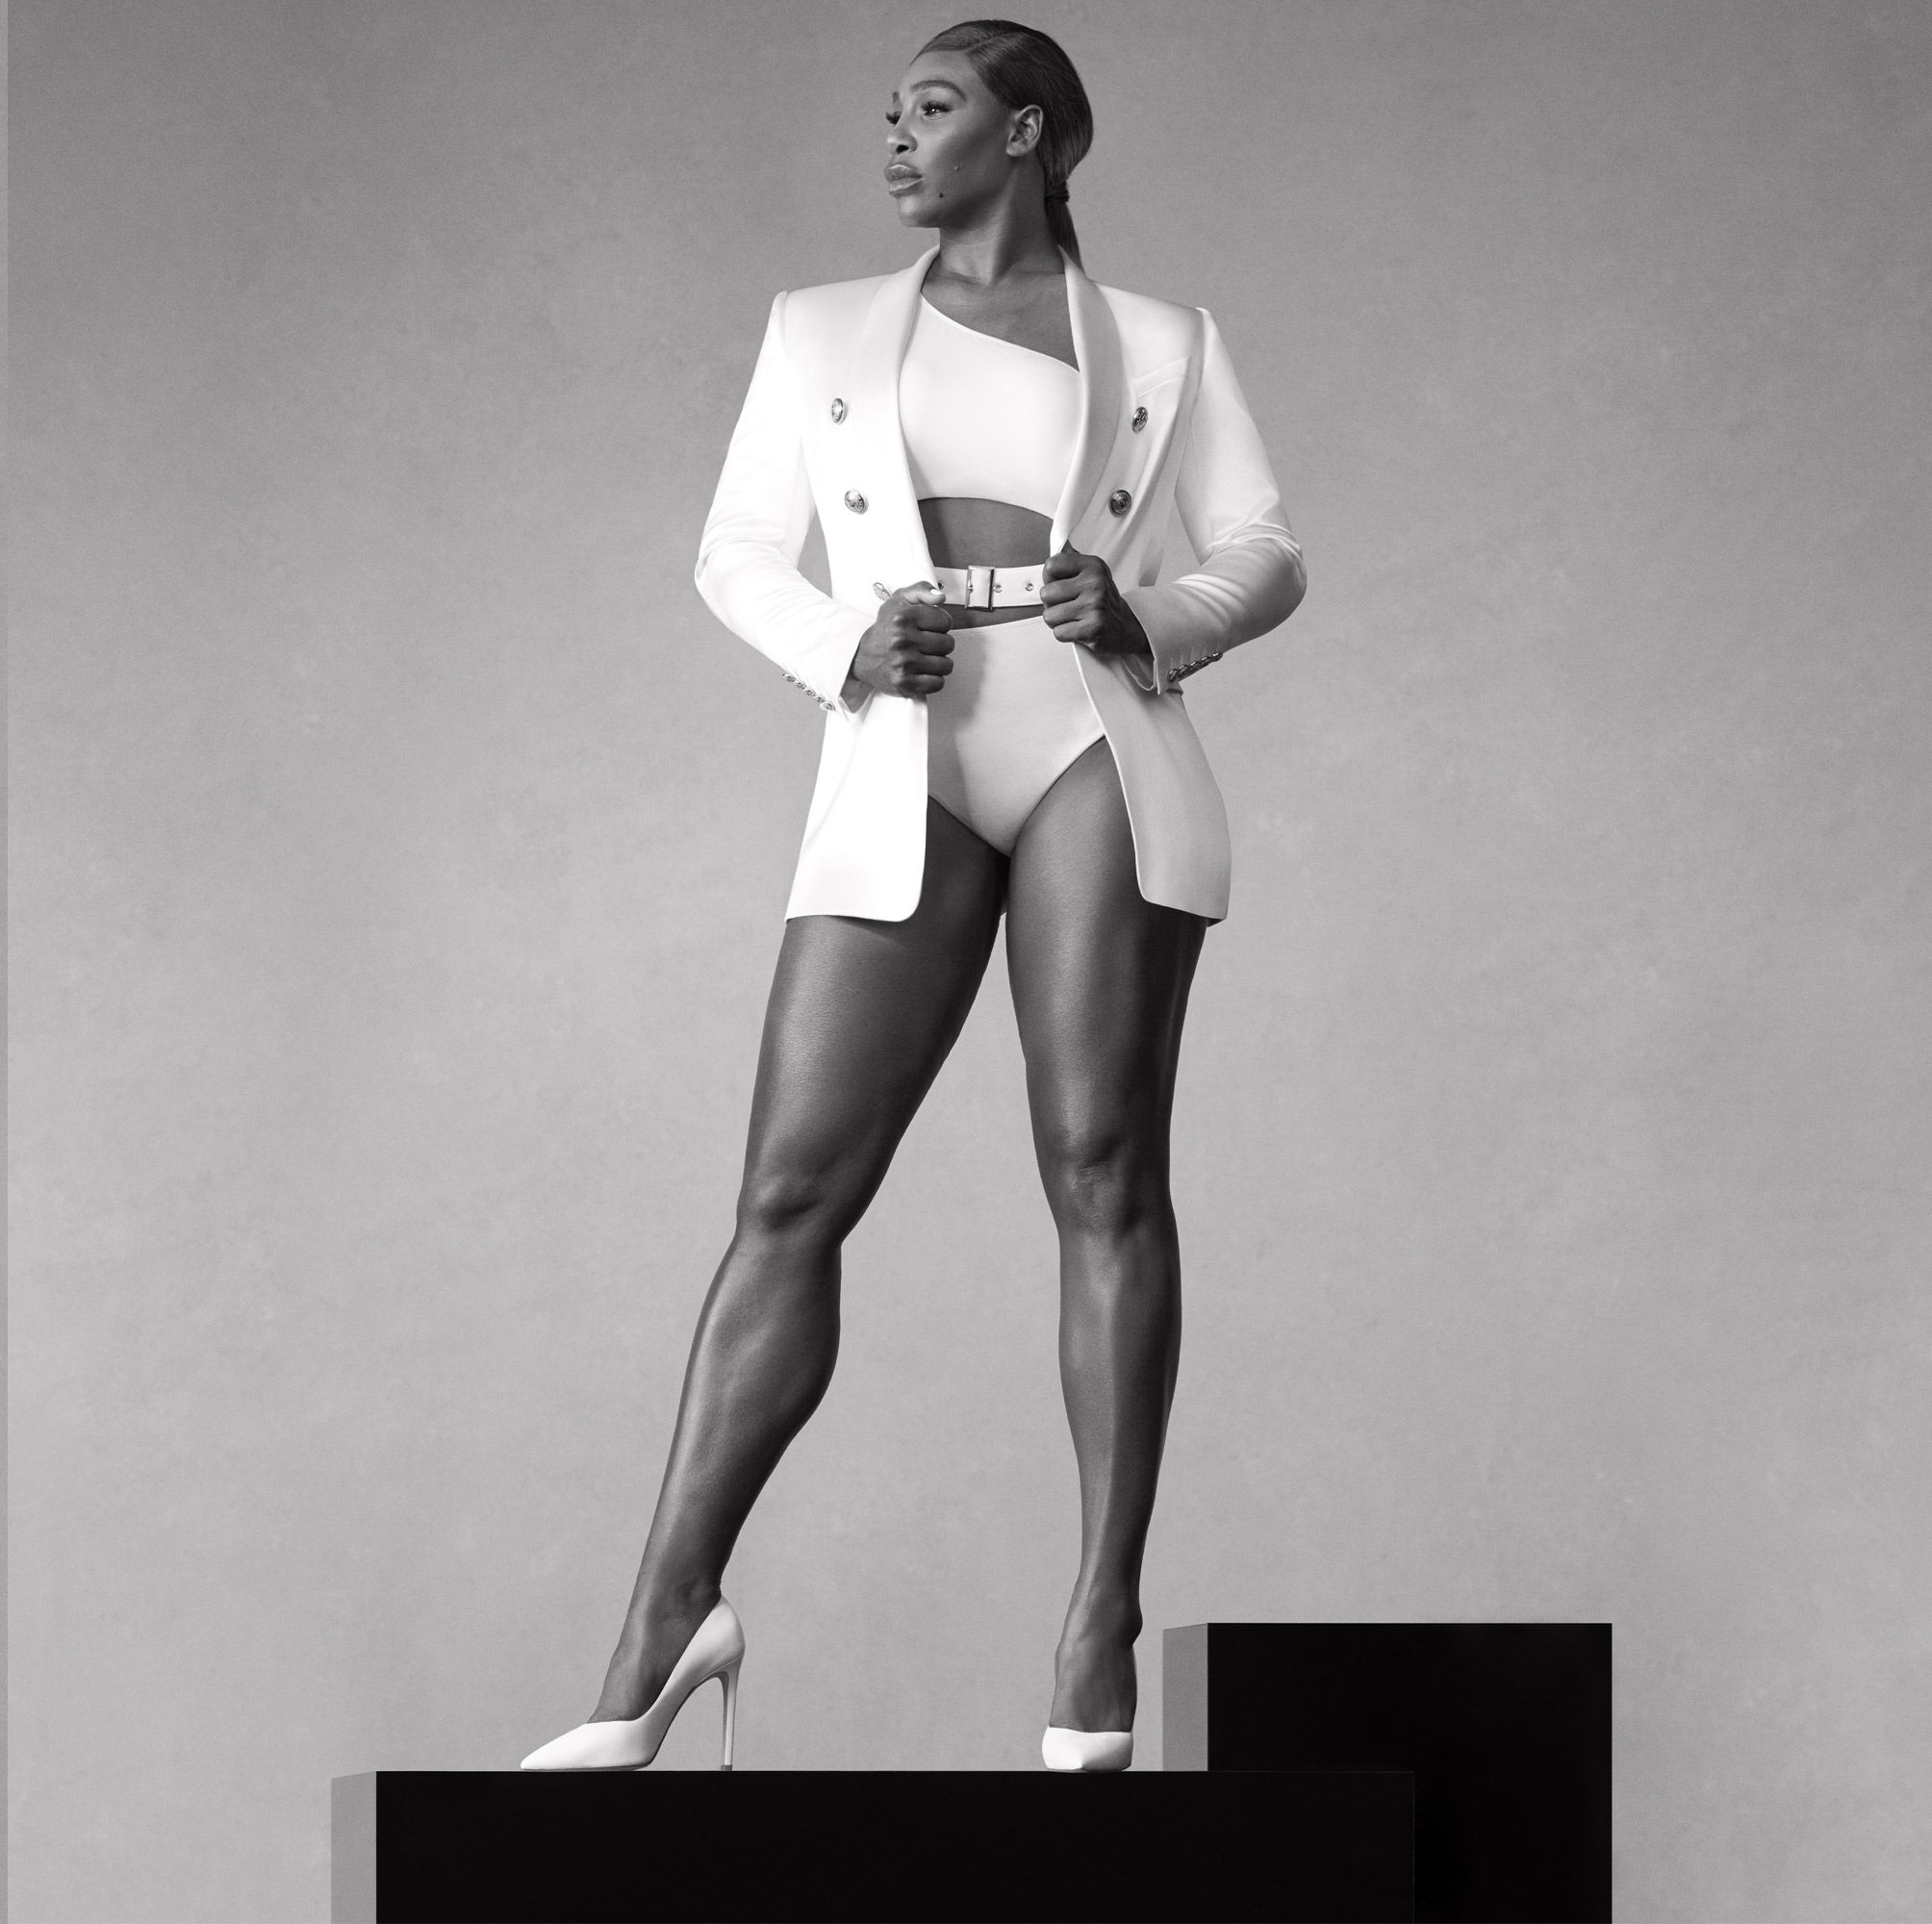 Serena Williams Is Bold and Beautiful in These Stuart Weitzman Ads